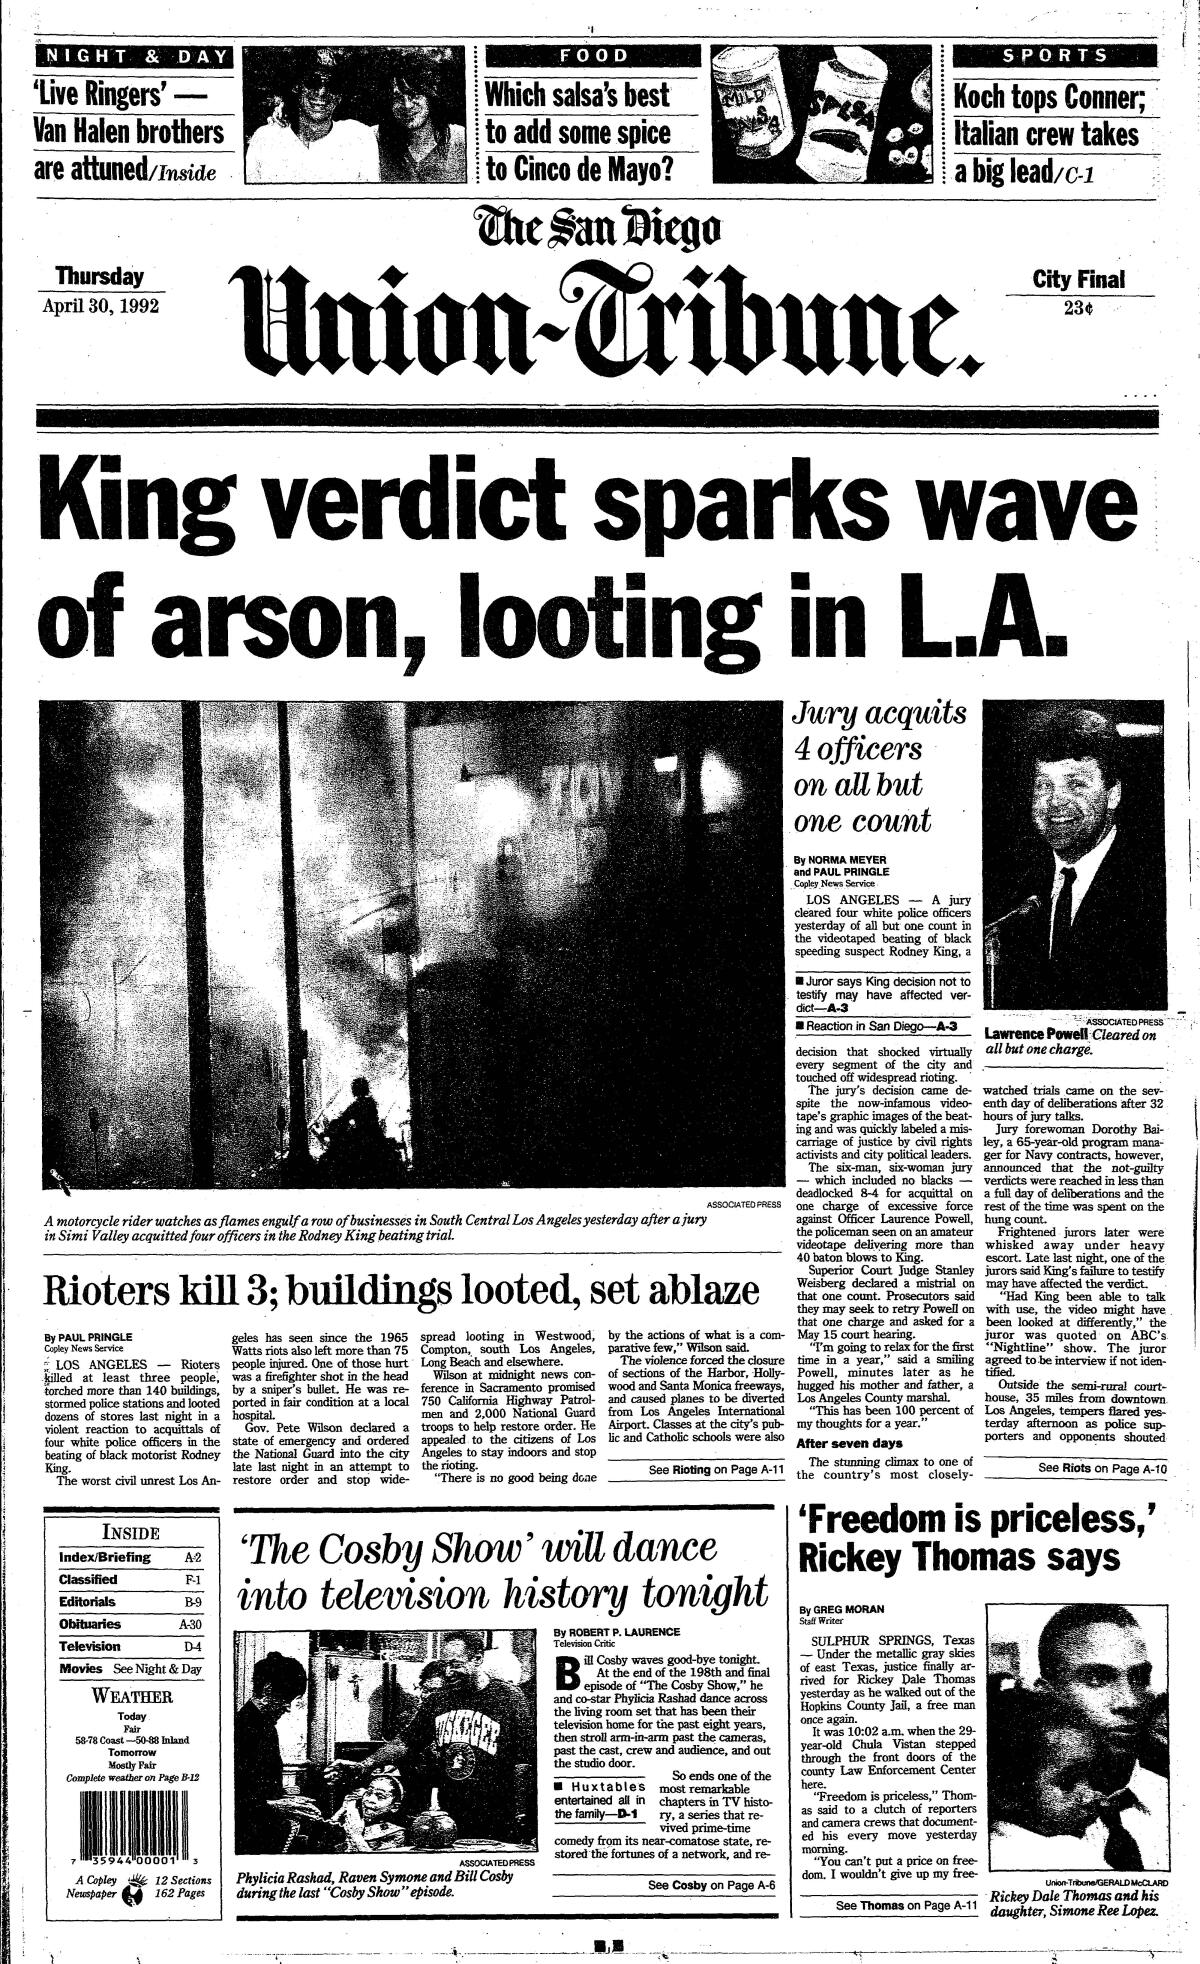 Front page of The San Diego Union-Tribune, April, 30, 1992, "King Verdict sparks wave of arson, looting in L.A."